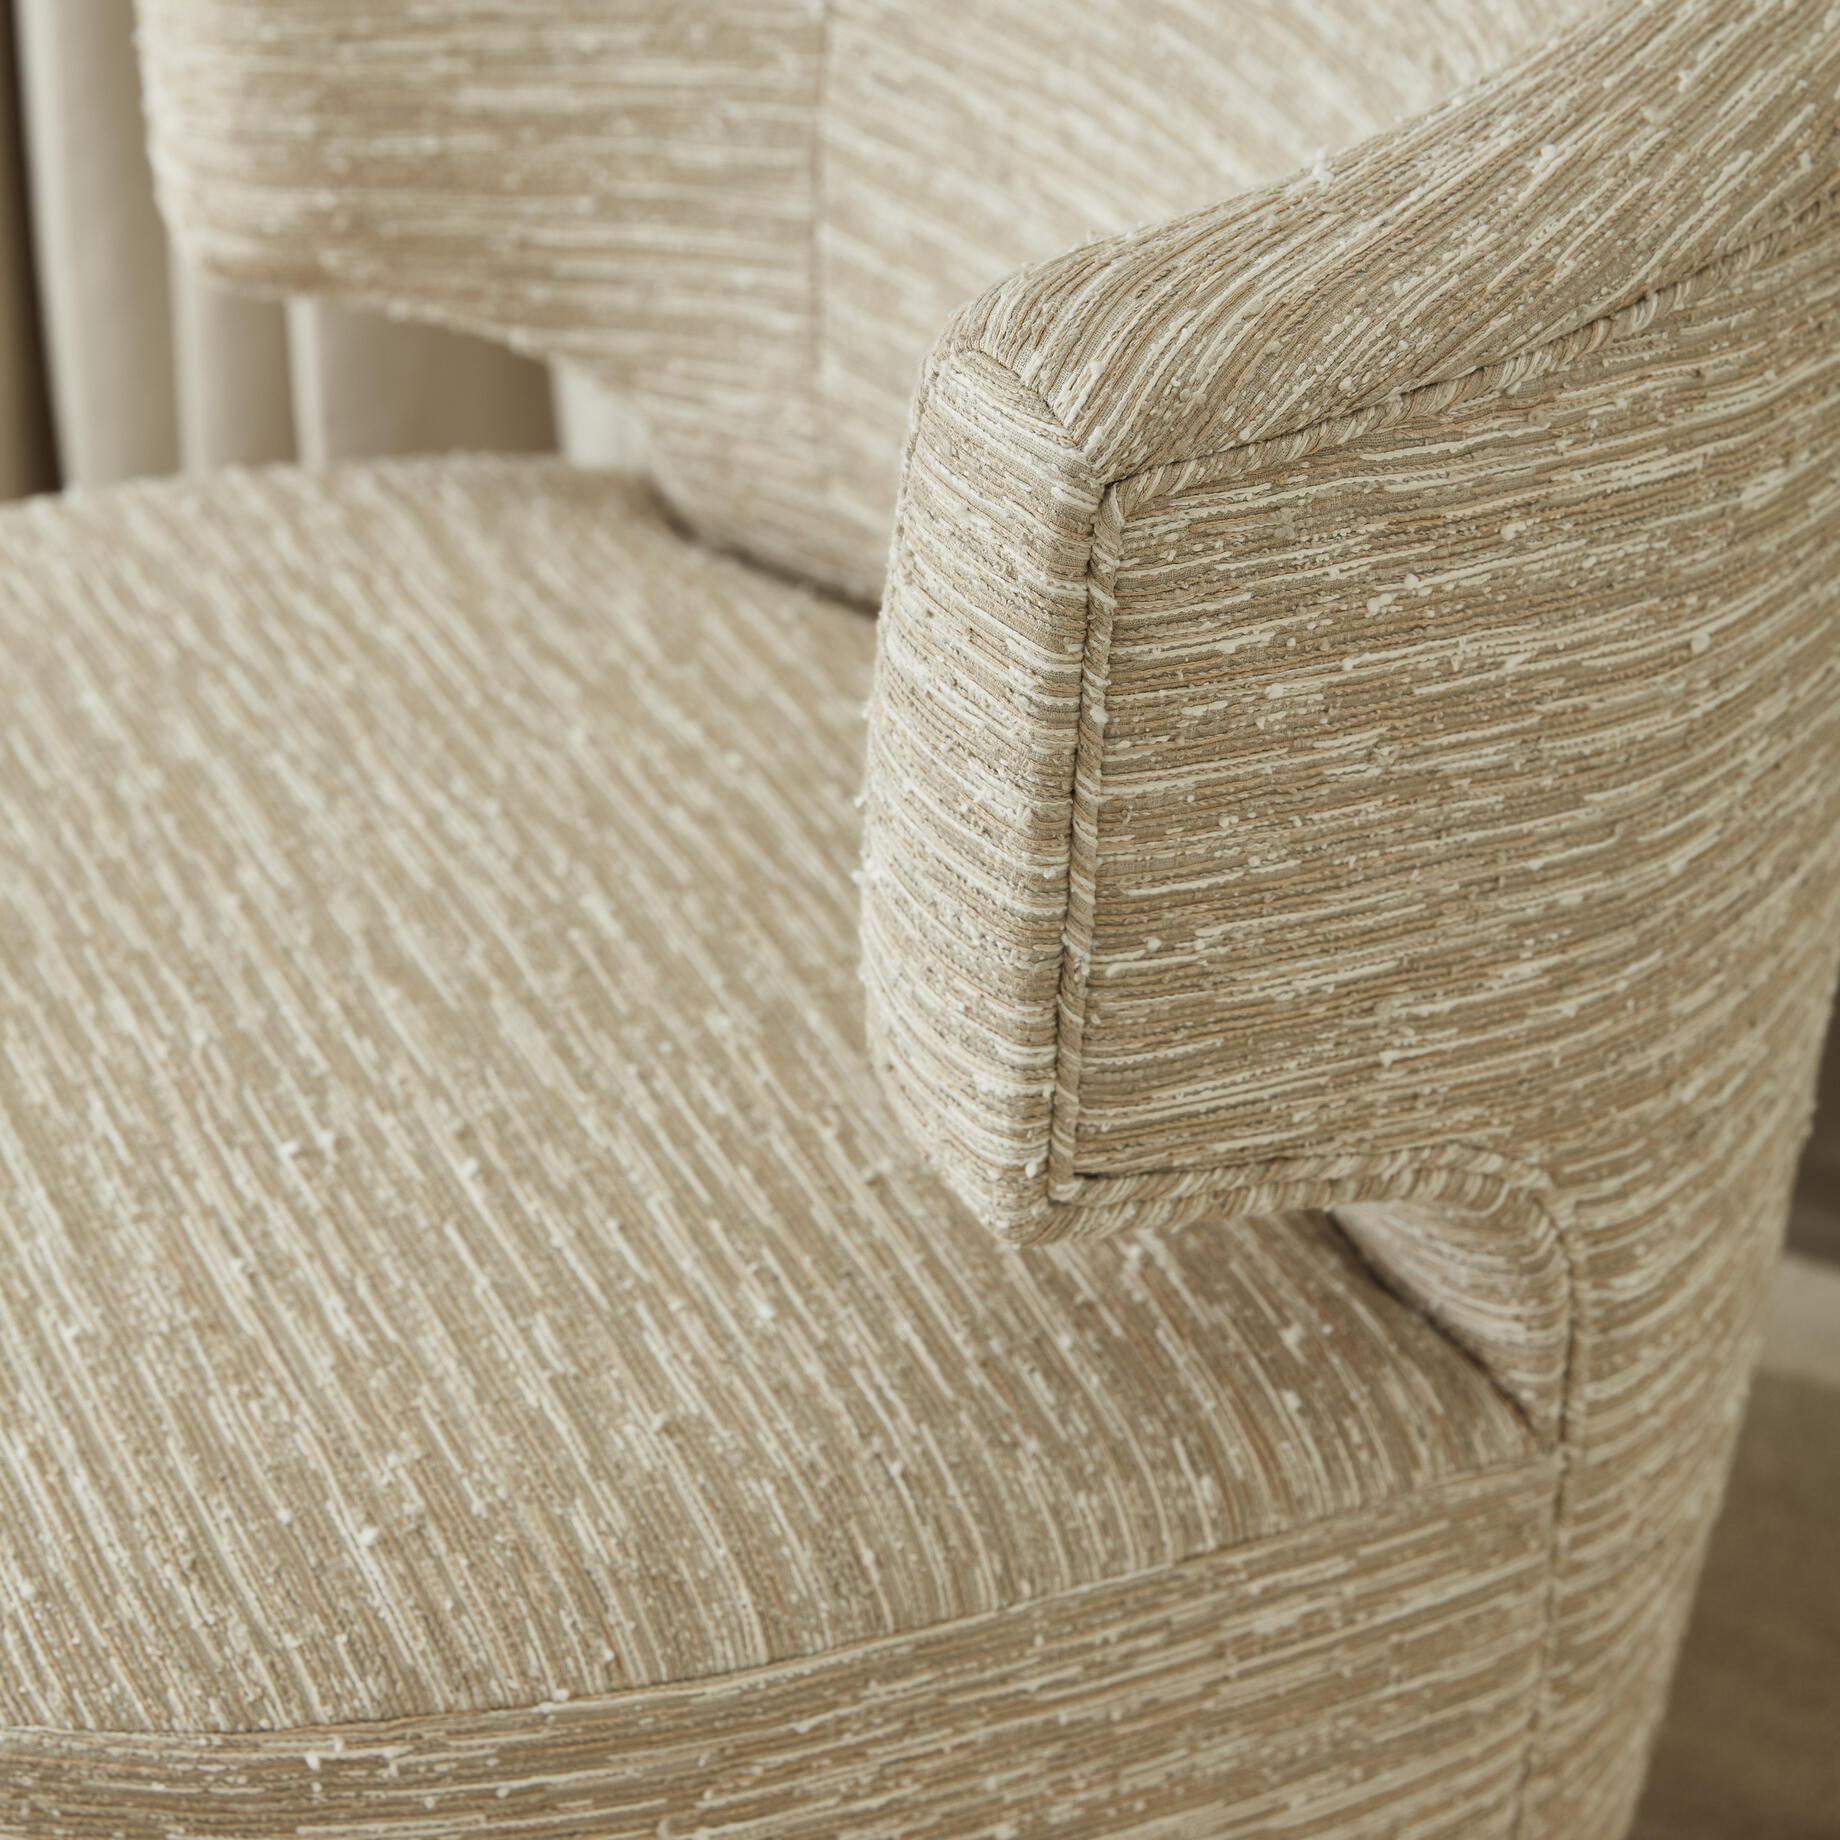 HOLLY HUNT Great Plains Performance Textiles Upholstered on Chair